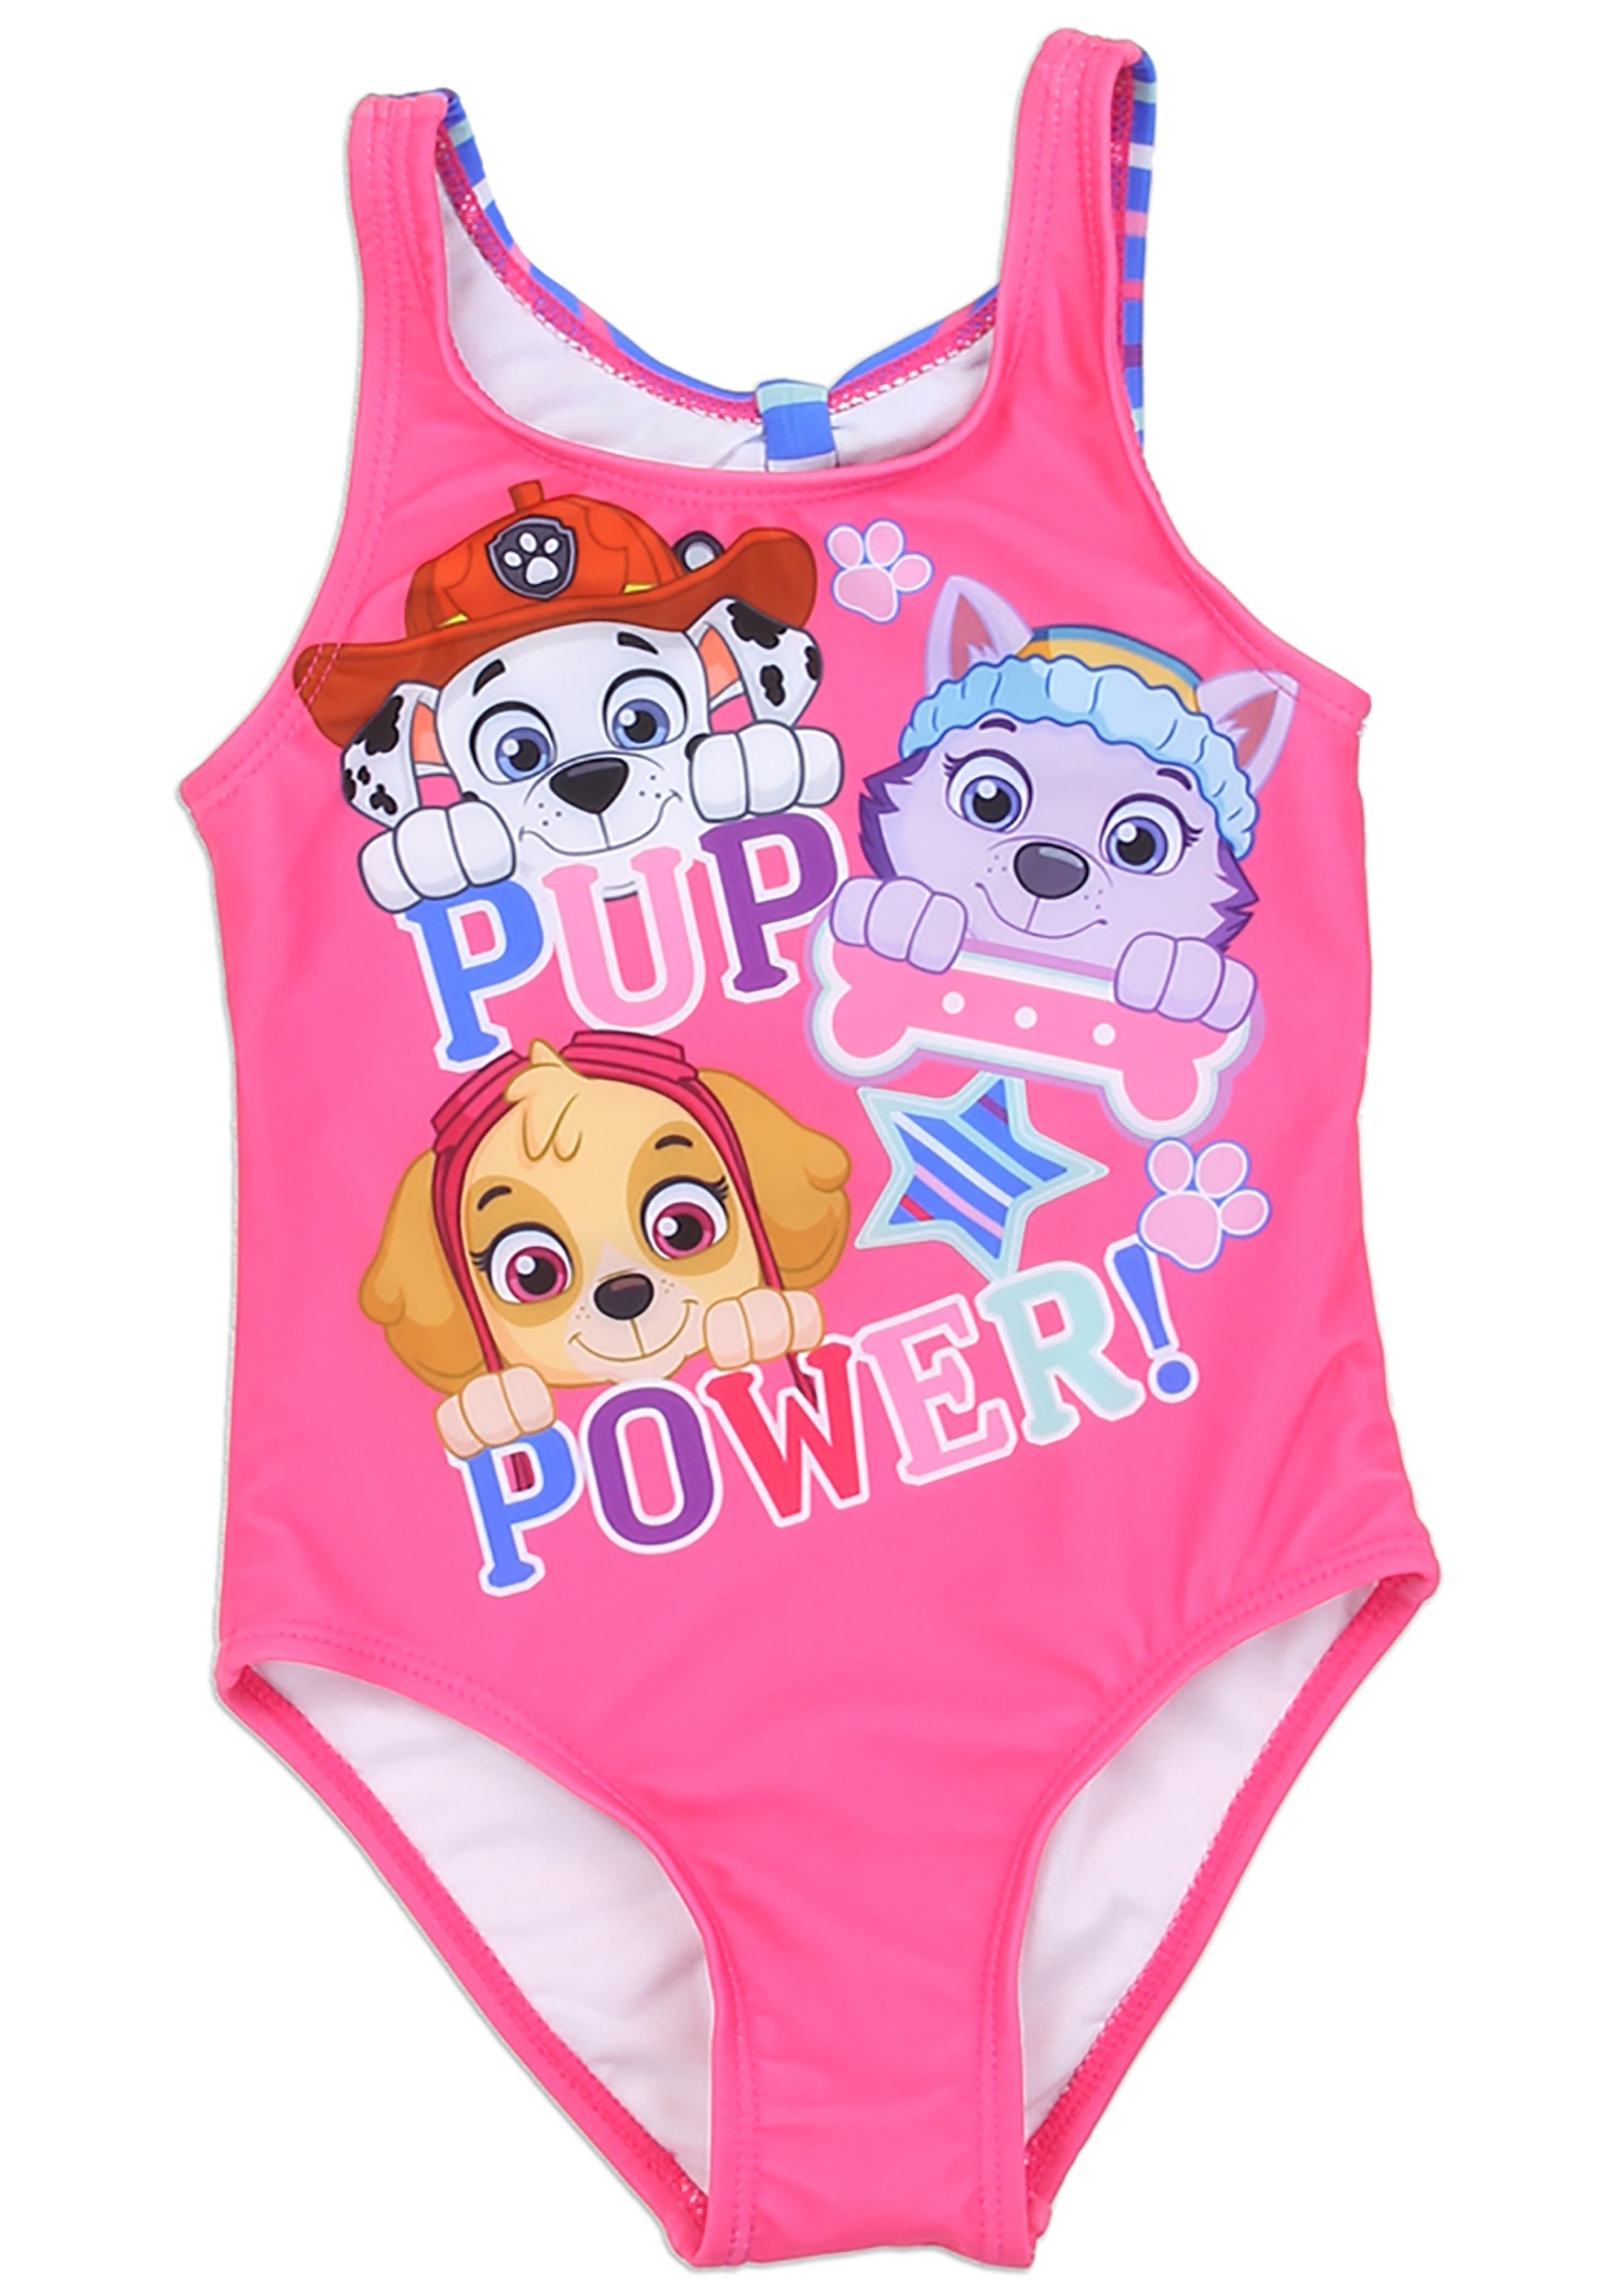 Paw Patrol Girls UV Protection Swimsuit 1-7 Years Available